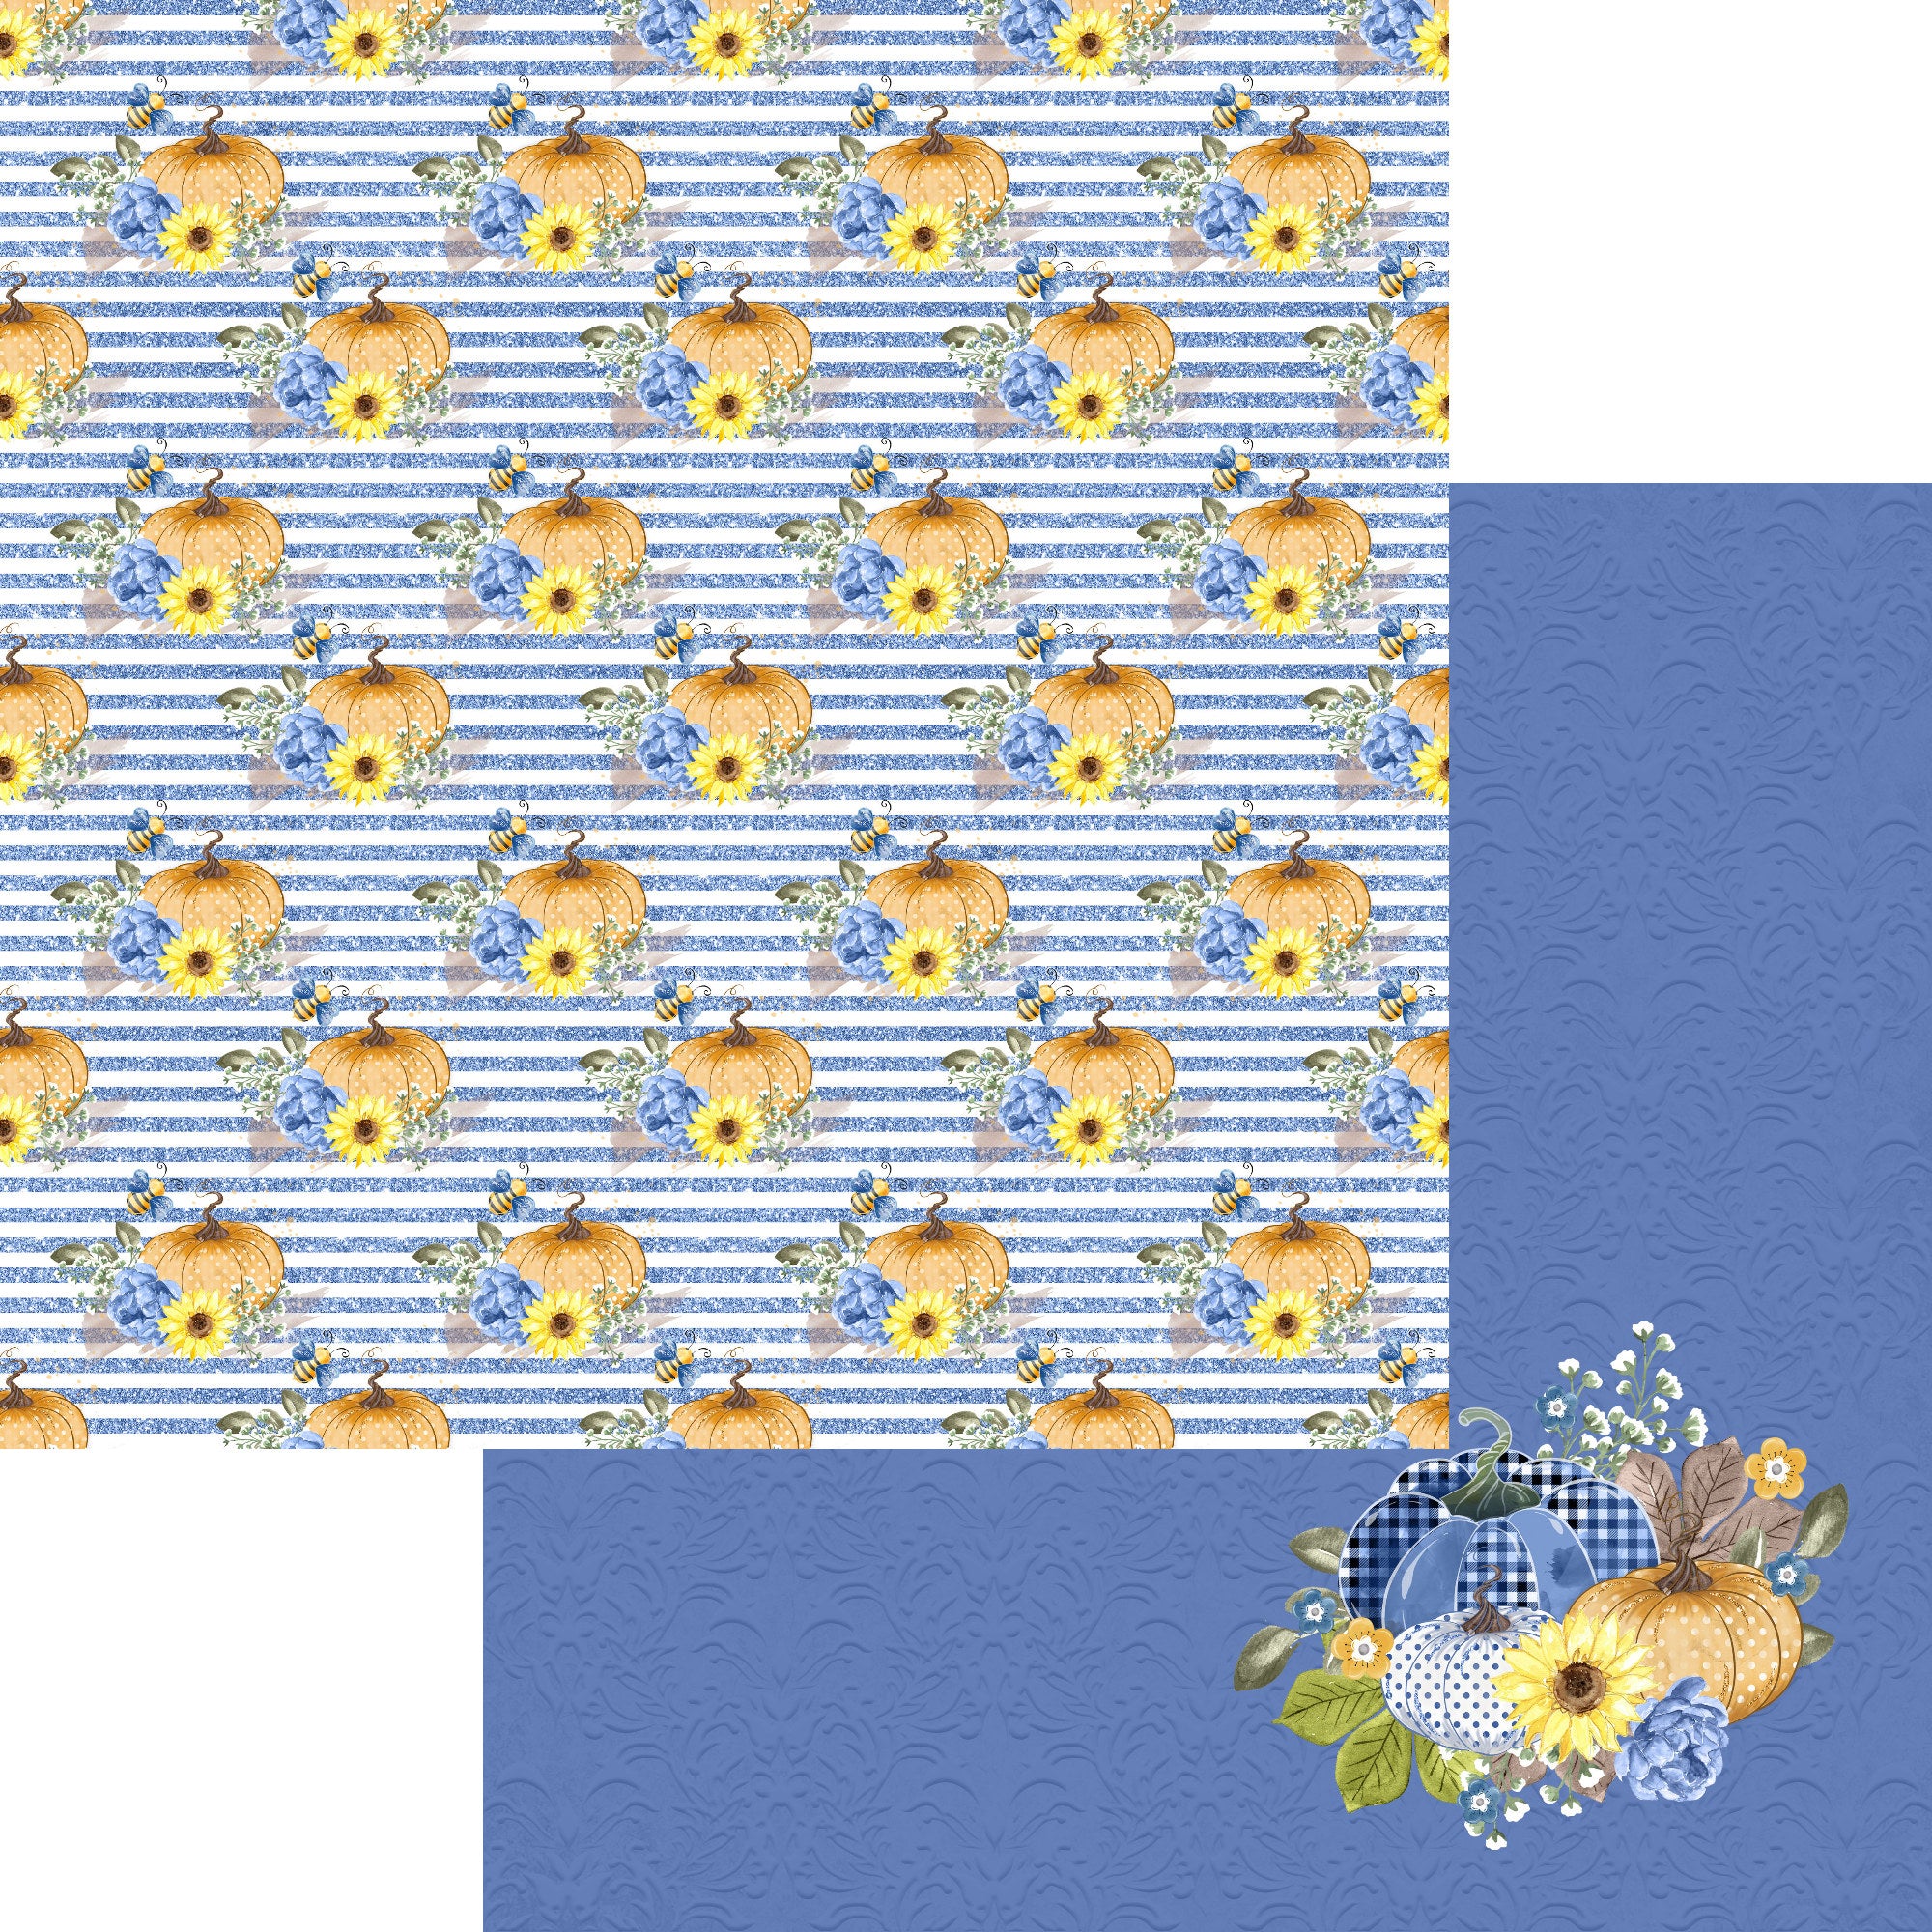 Bumblebee Fall Collection Pumpkin Stripes 12 x 12 Double-Sided Scrapbook Paper by SSC Designs